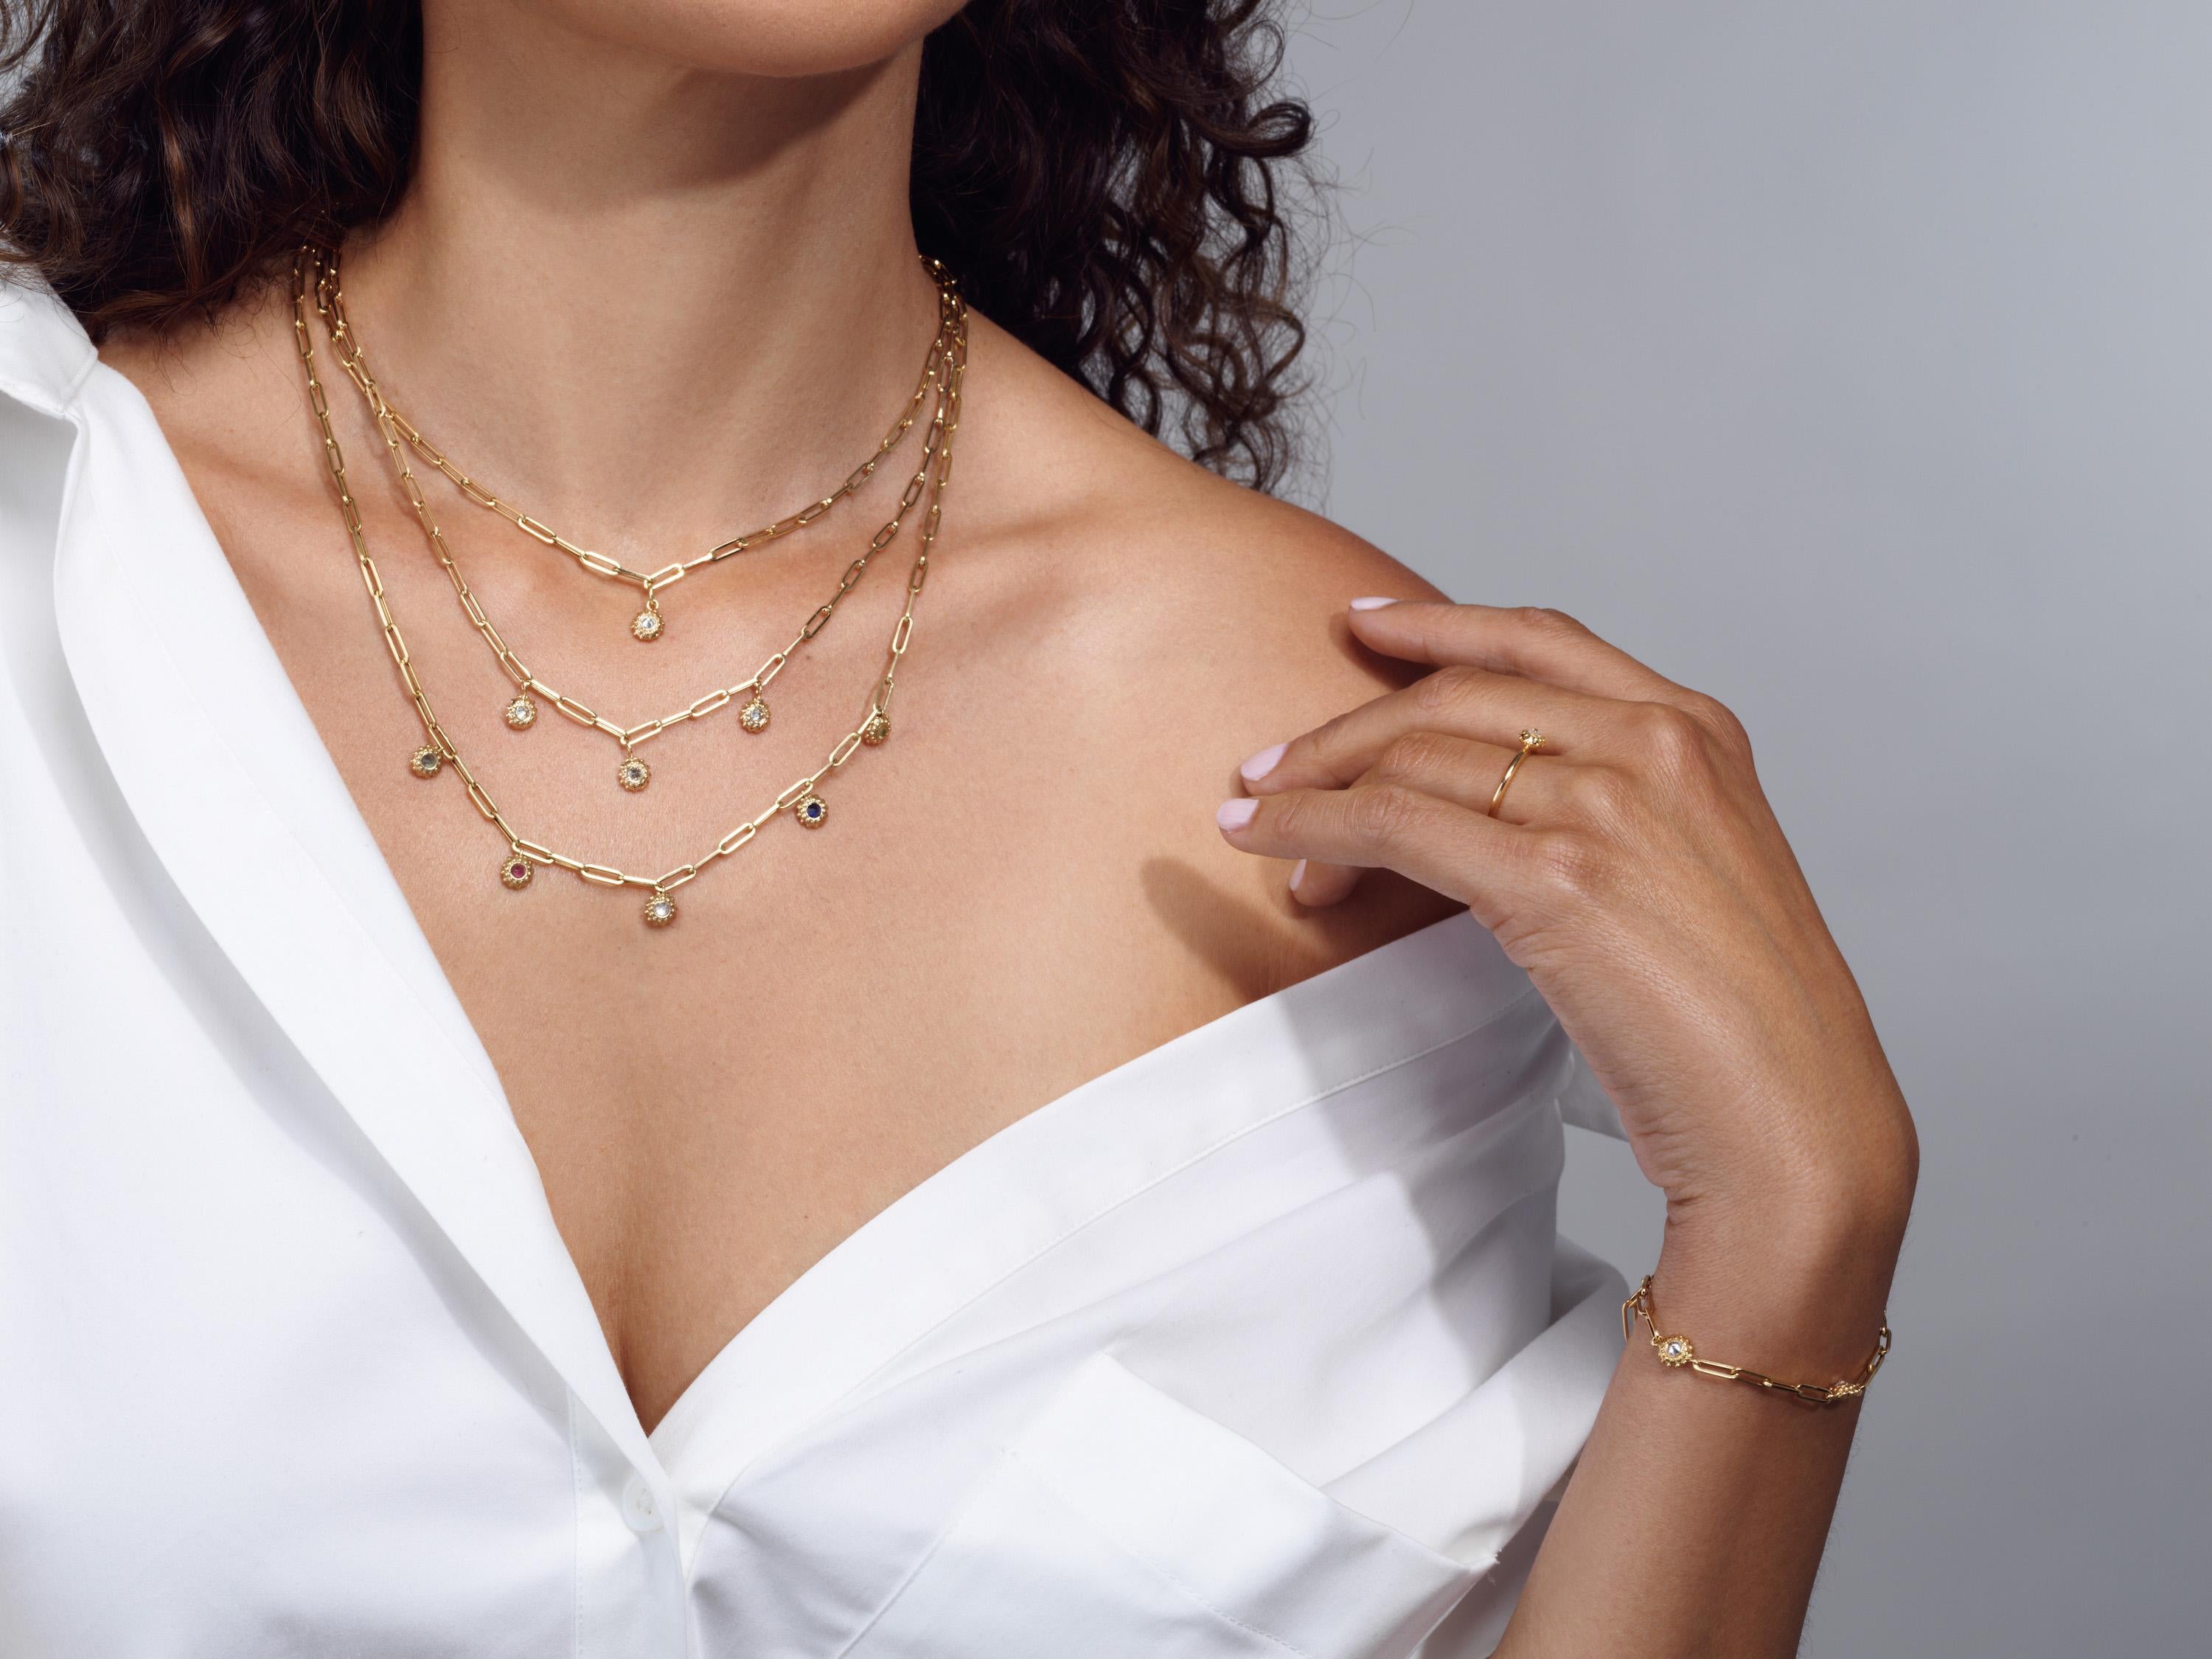 Created by AnaKatarina to celebrate her love for her three daughters and her parents,  the ‘Tribe’ necklace is a simply beautiful expression of AnaKatarina’s theme of intuition. The inverted birthstones of your choice are surrounded by an organic